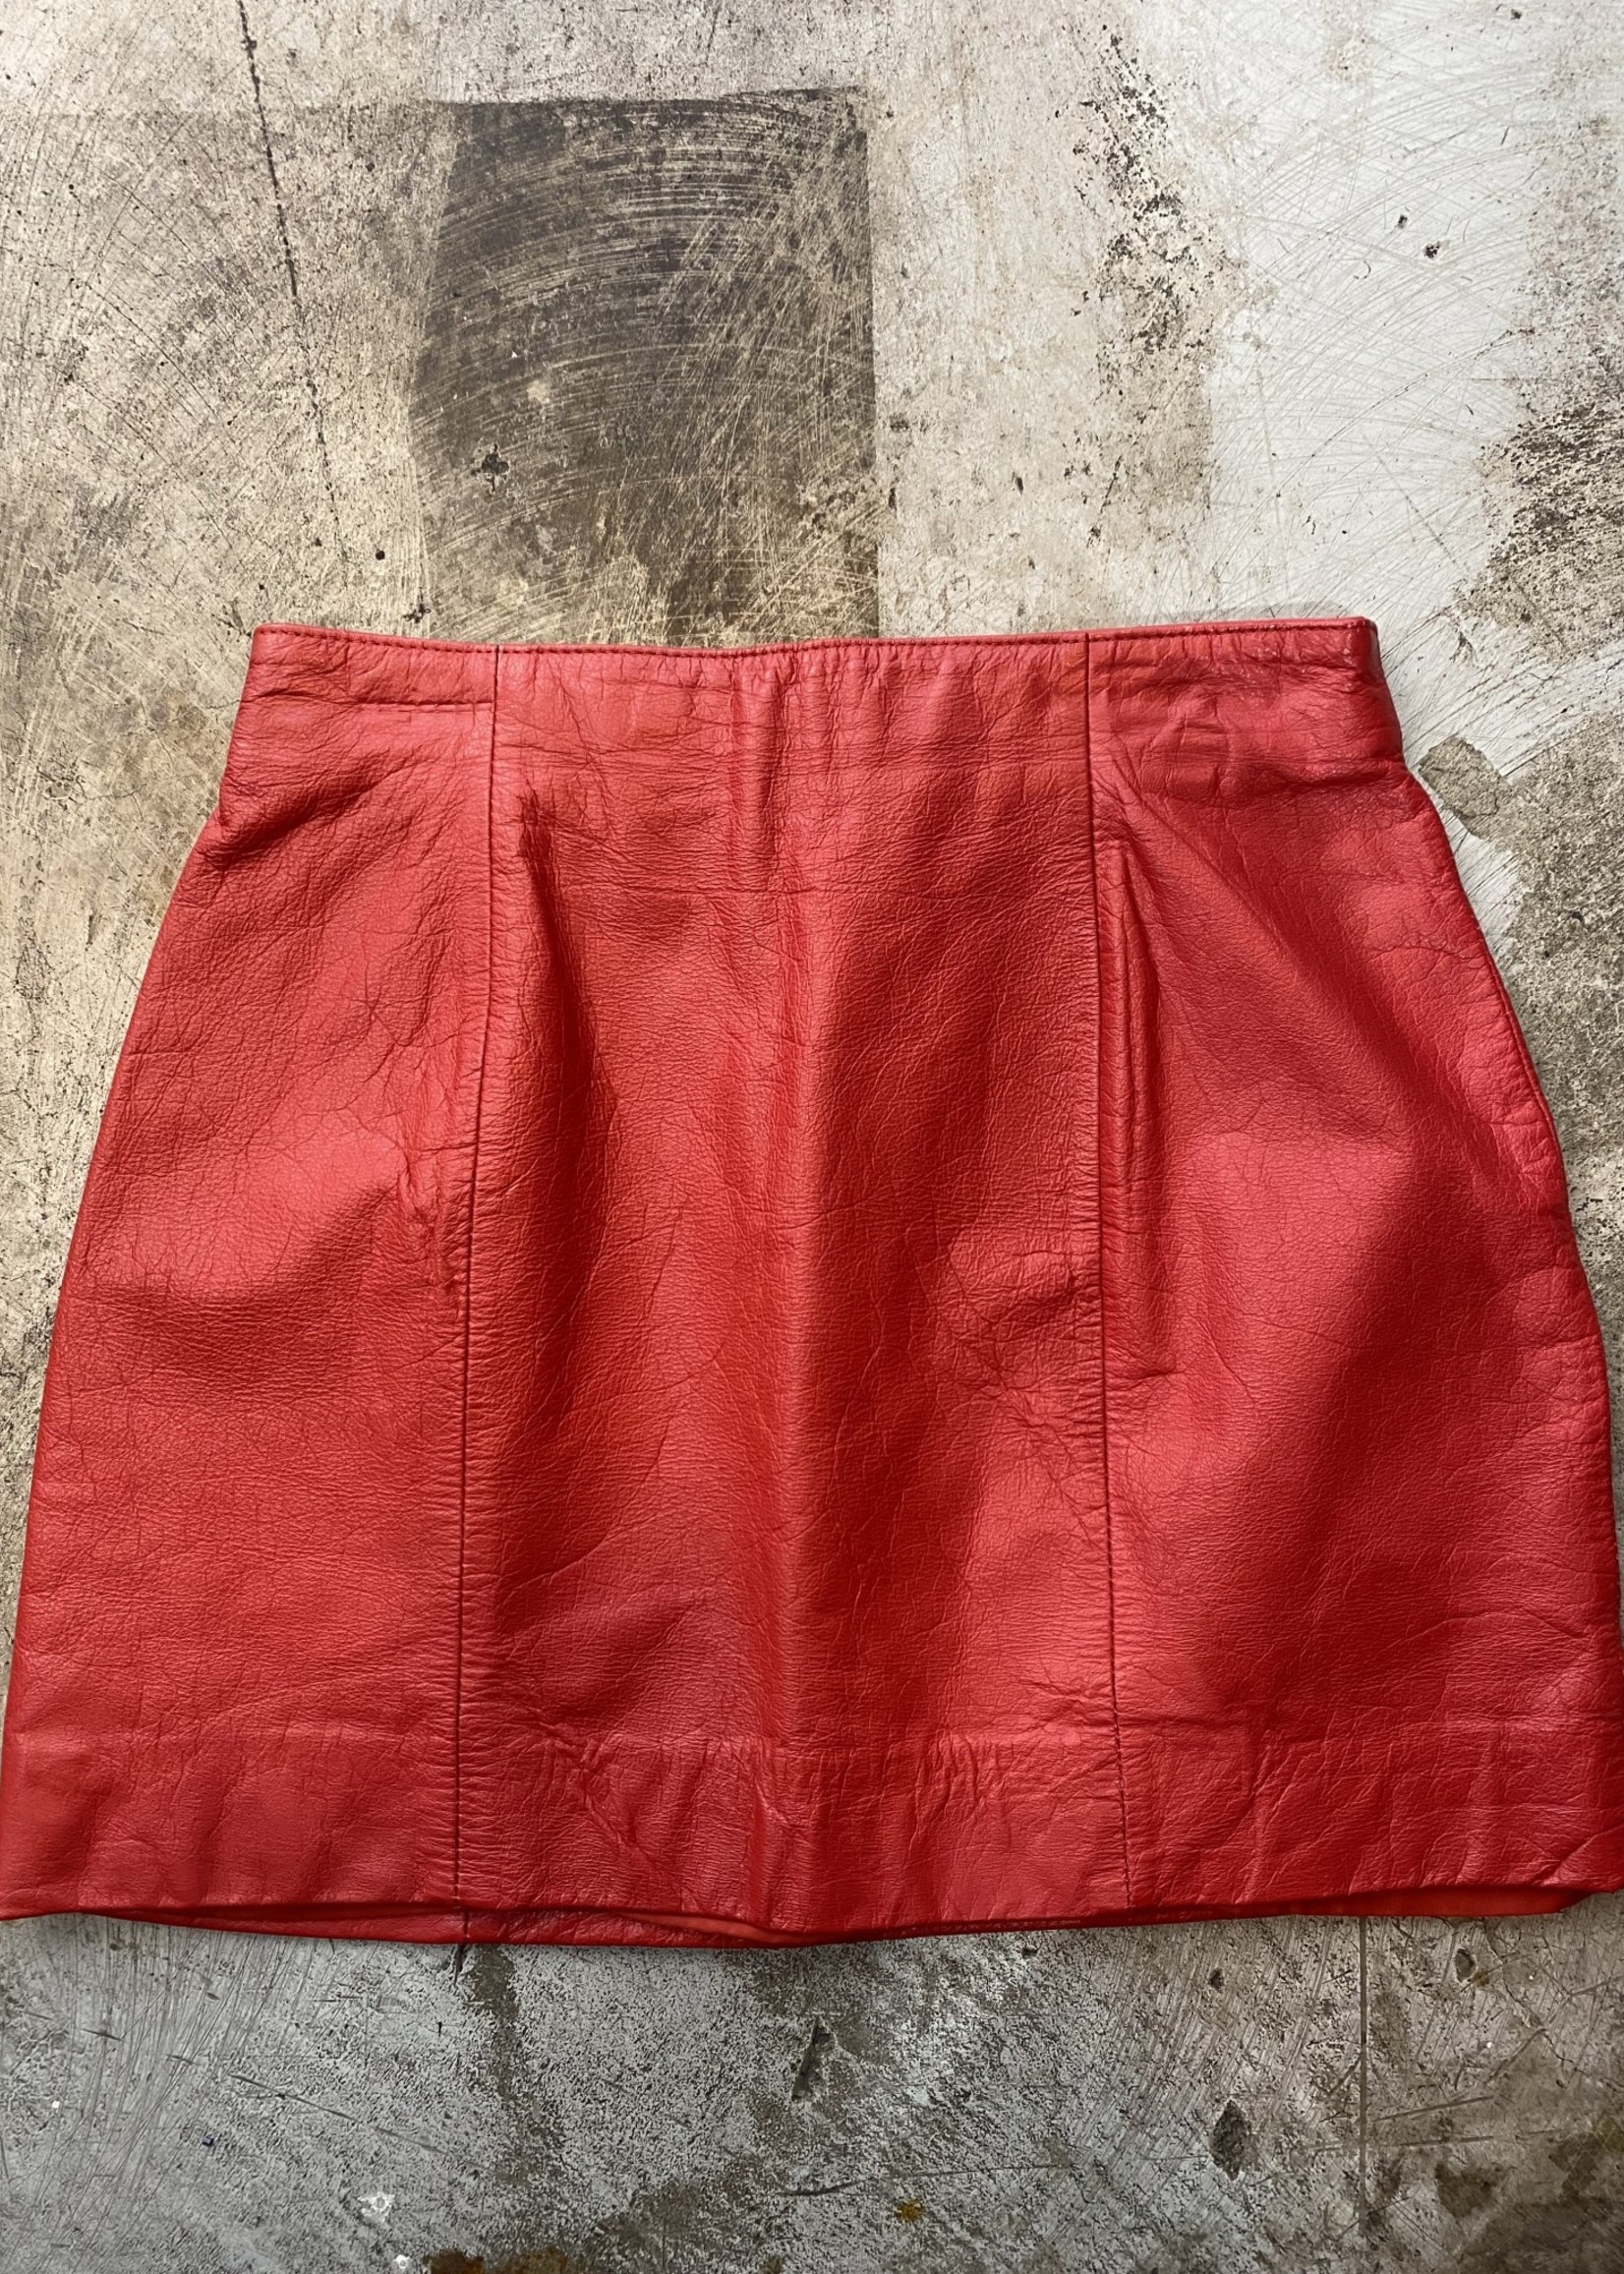 Vintage CHIA Red Leather Skirt M